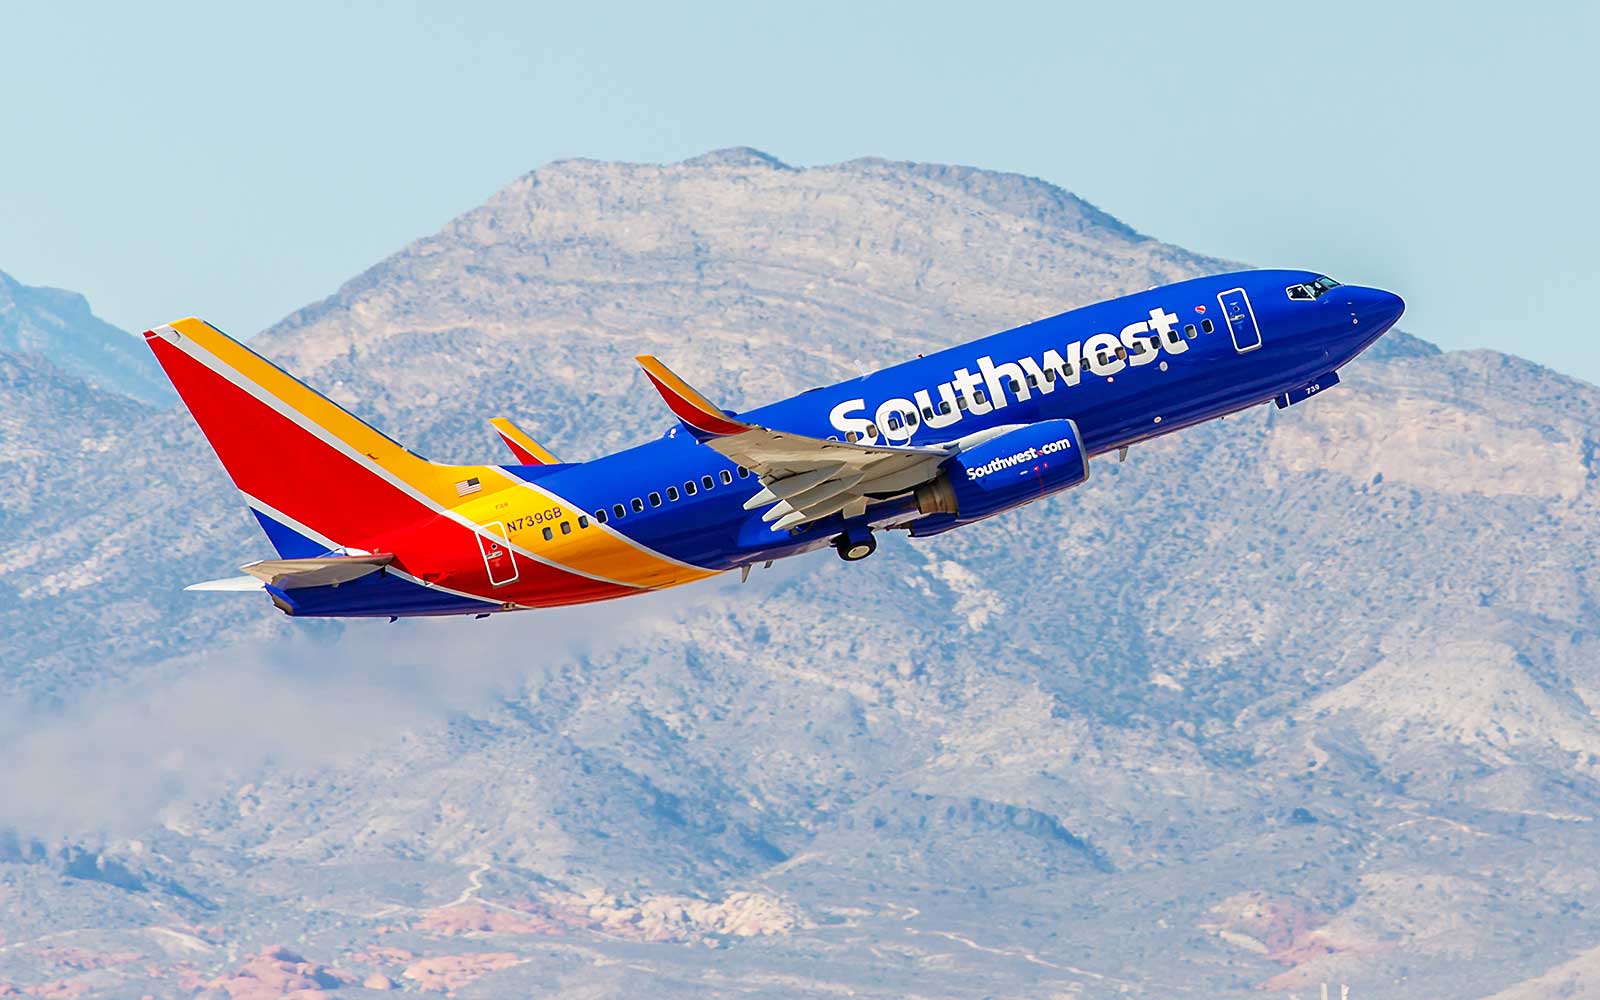 10% Off When You Spend $100 or More on Southwest Airlines Gift Cards!